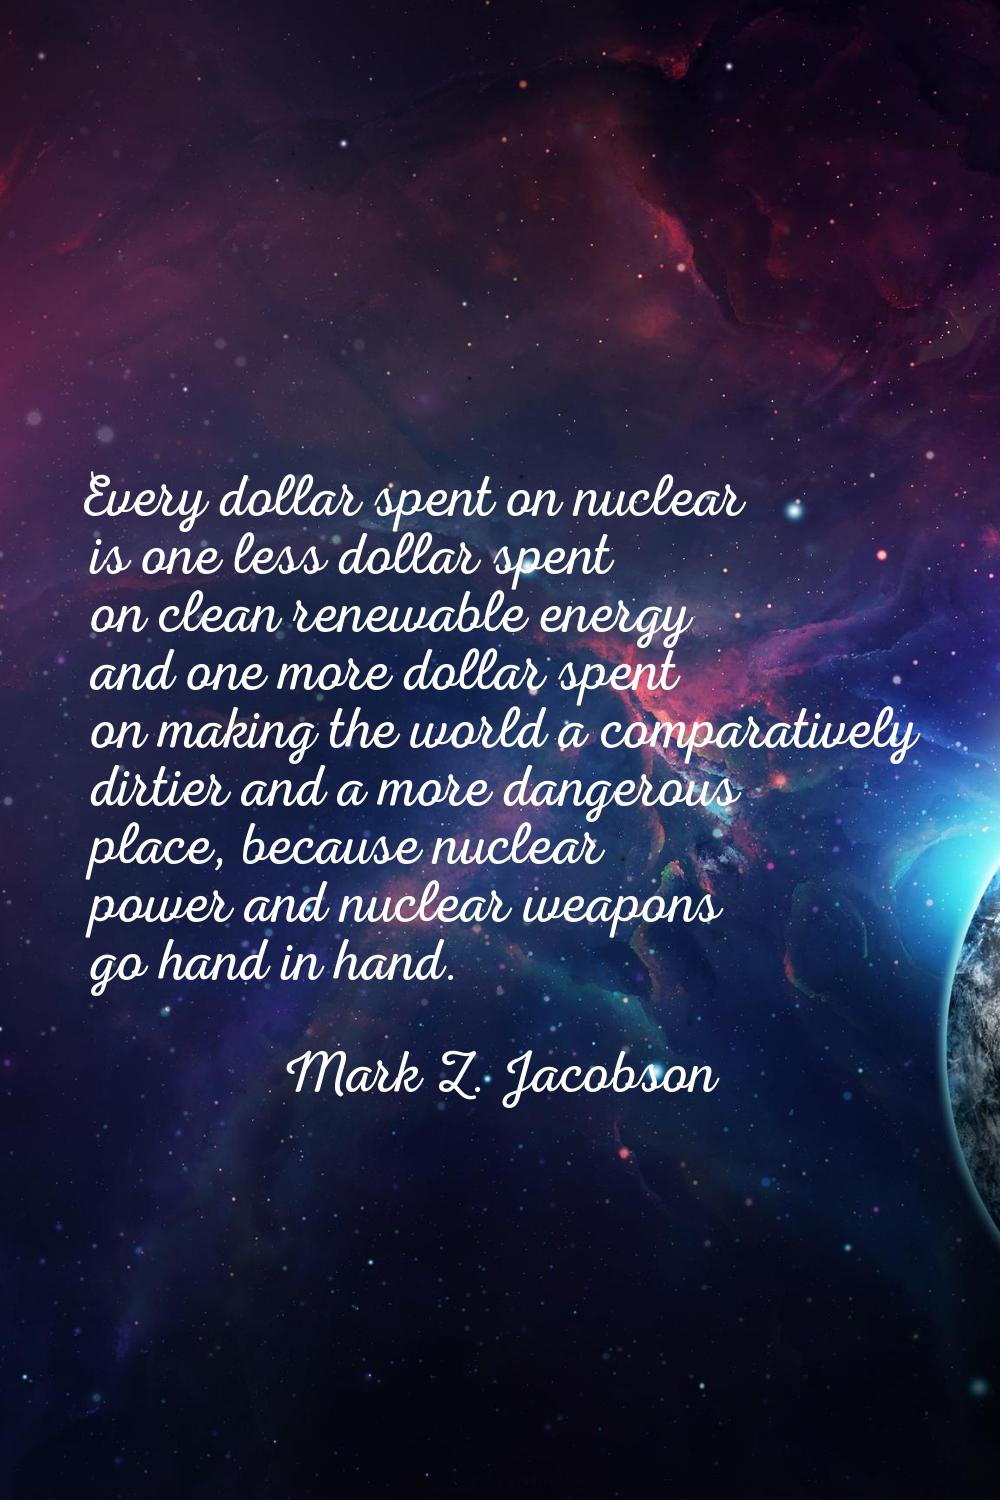 Every dollar spent on nuclear is one less dollar spent on clean renewable energy and one more dolla